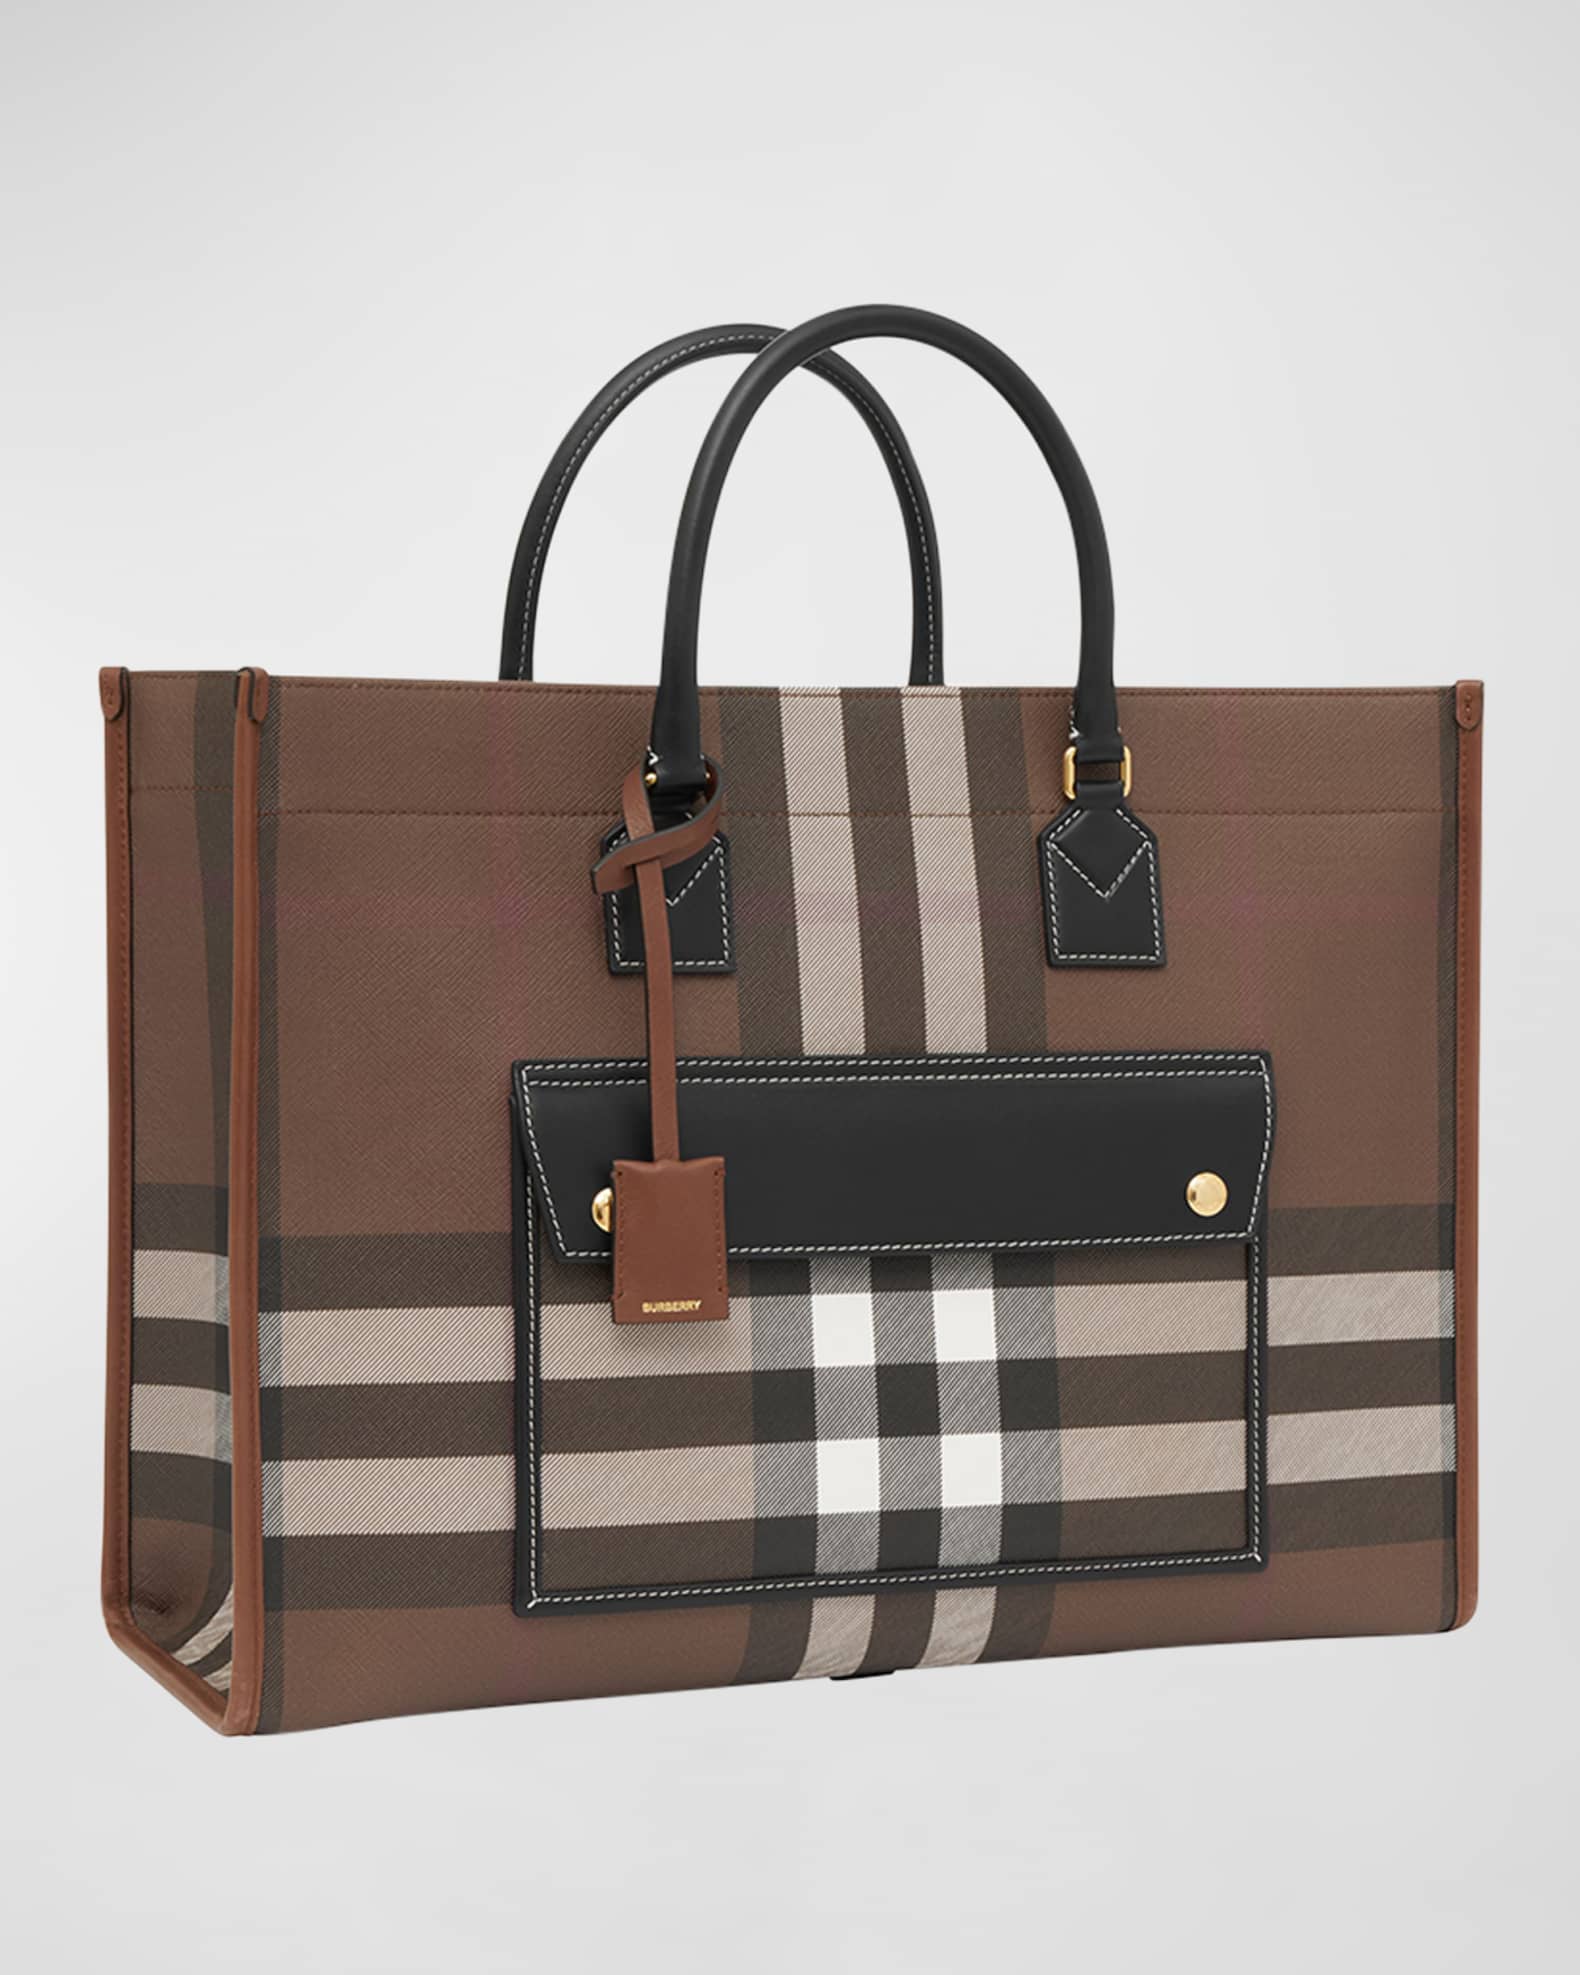 Womens Burberry Bags, Leather & Canvas Handbags